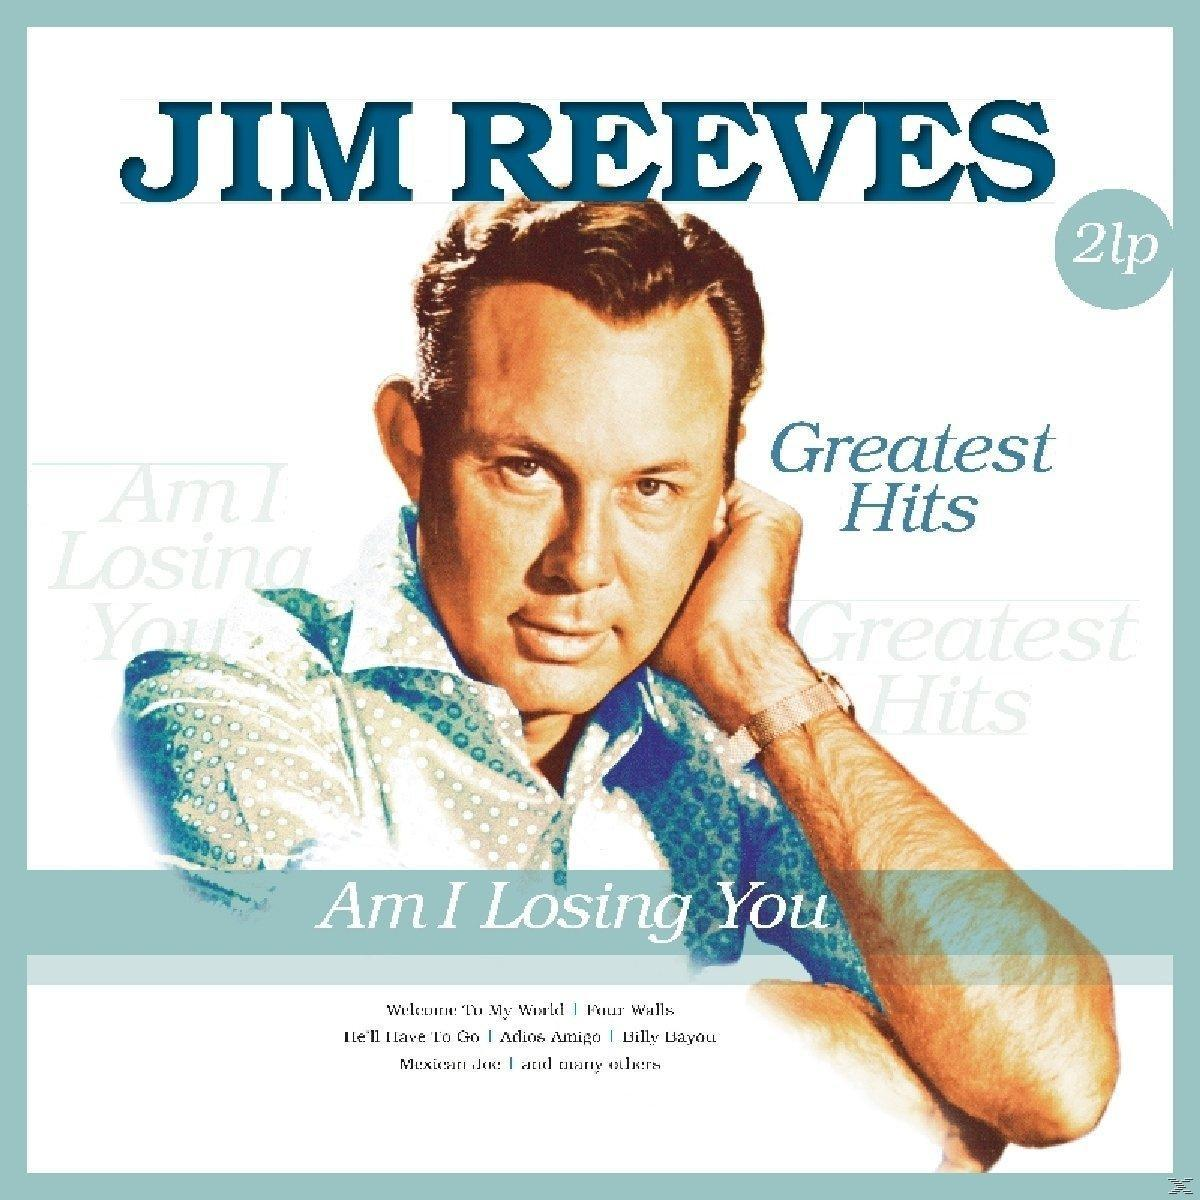 Jim Reeves LOSING - AM YOU-GREATEST I HITS (Vinyl) 